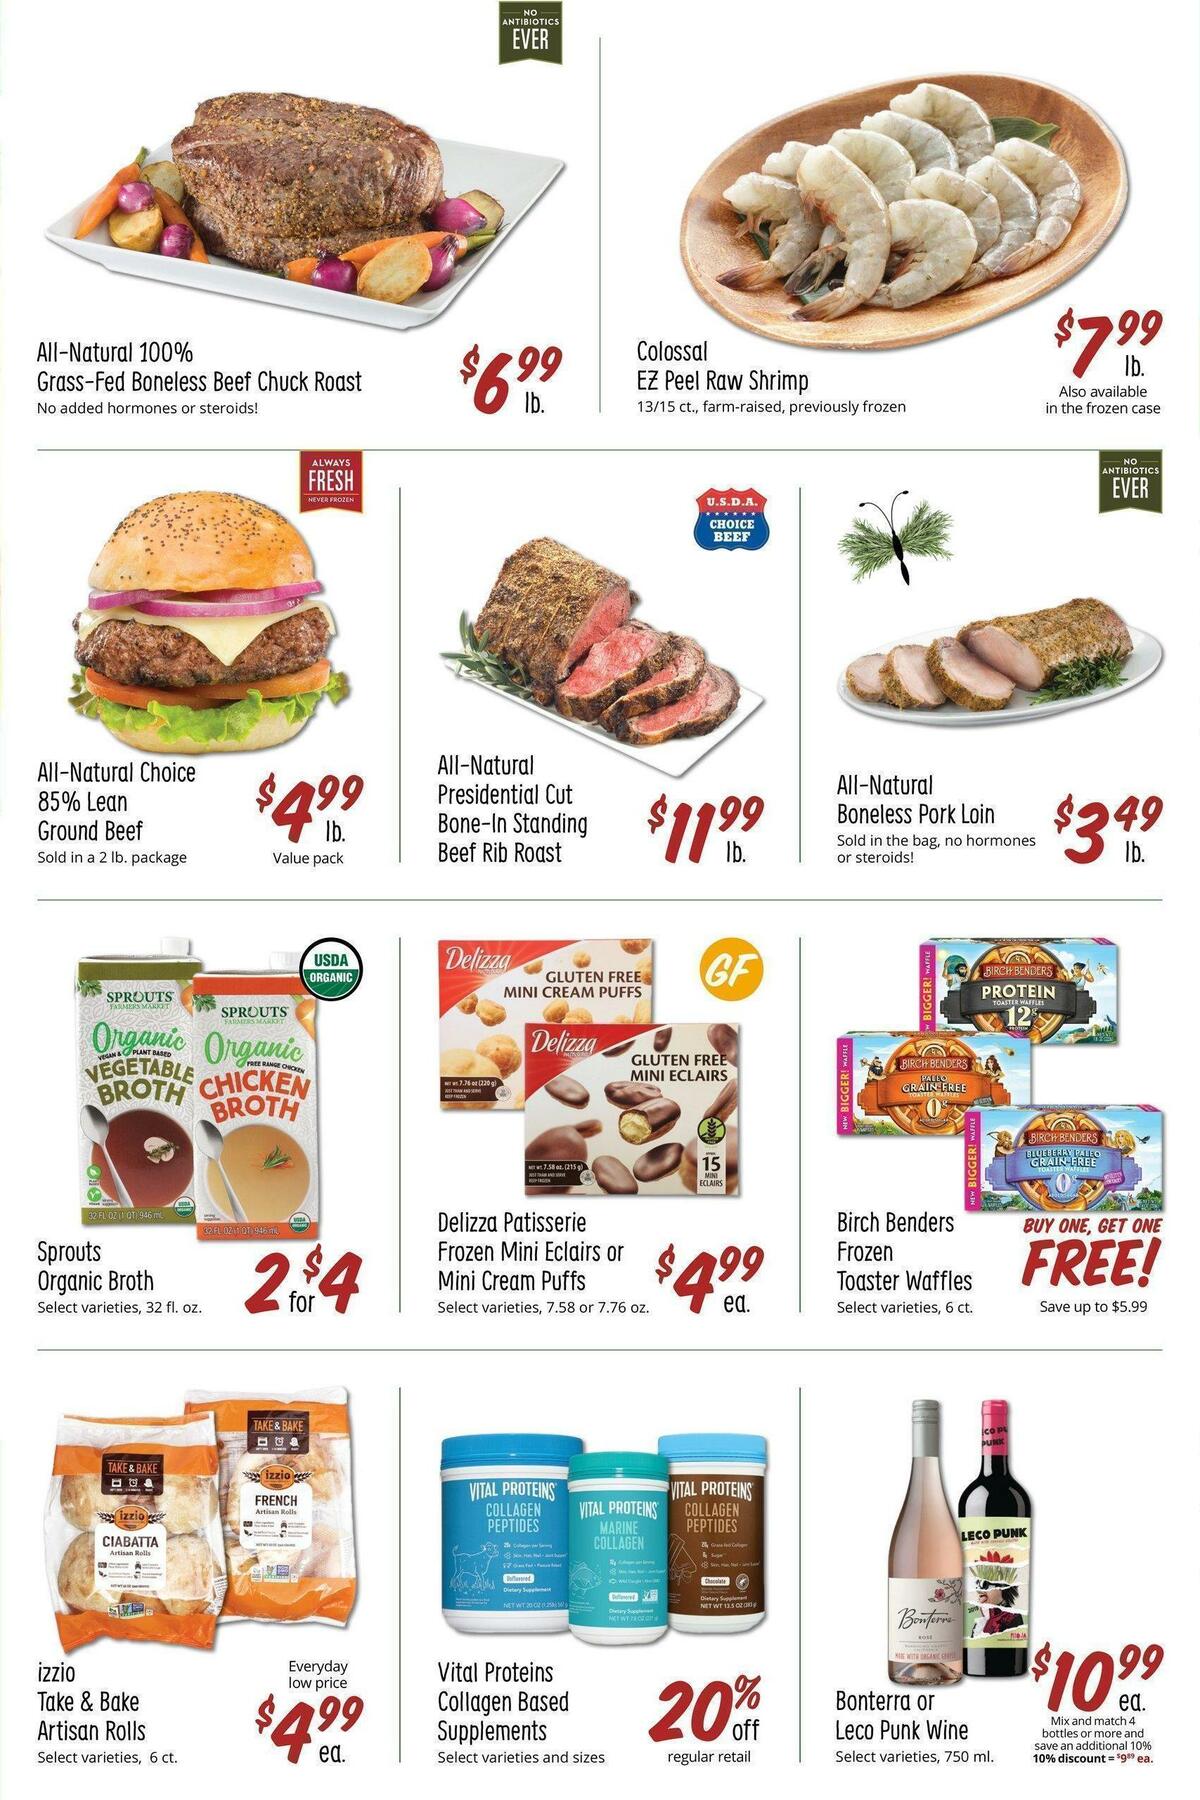 Sprouts Farmers Market Weekly Ad from April 5